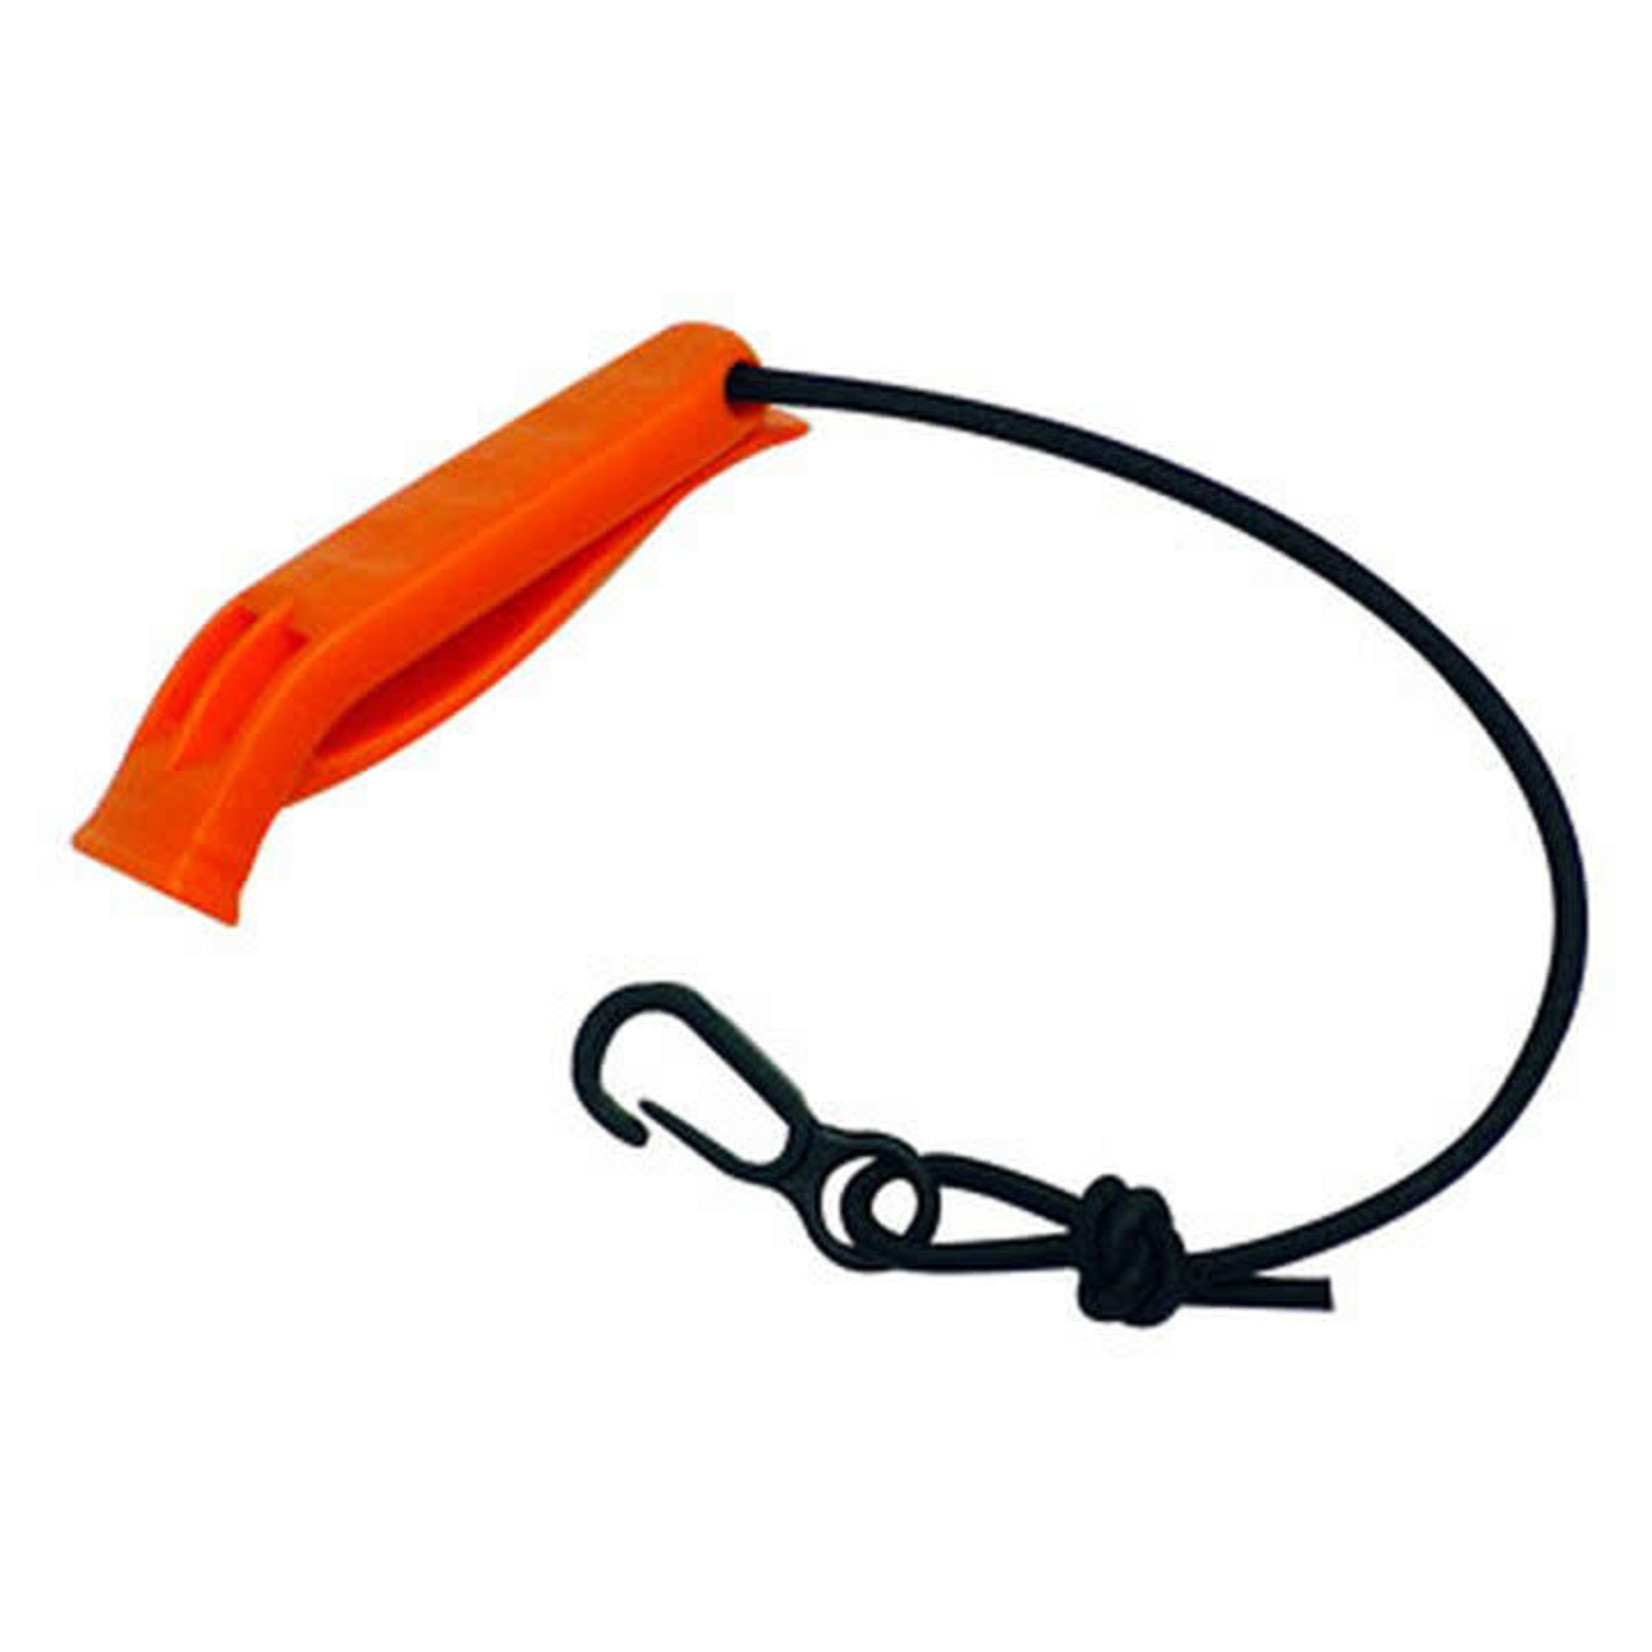 Seals SAFETY WHISTLE